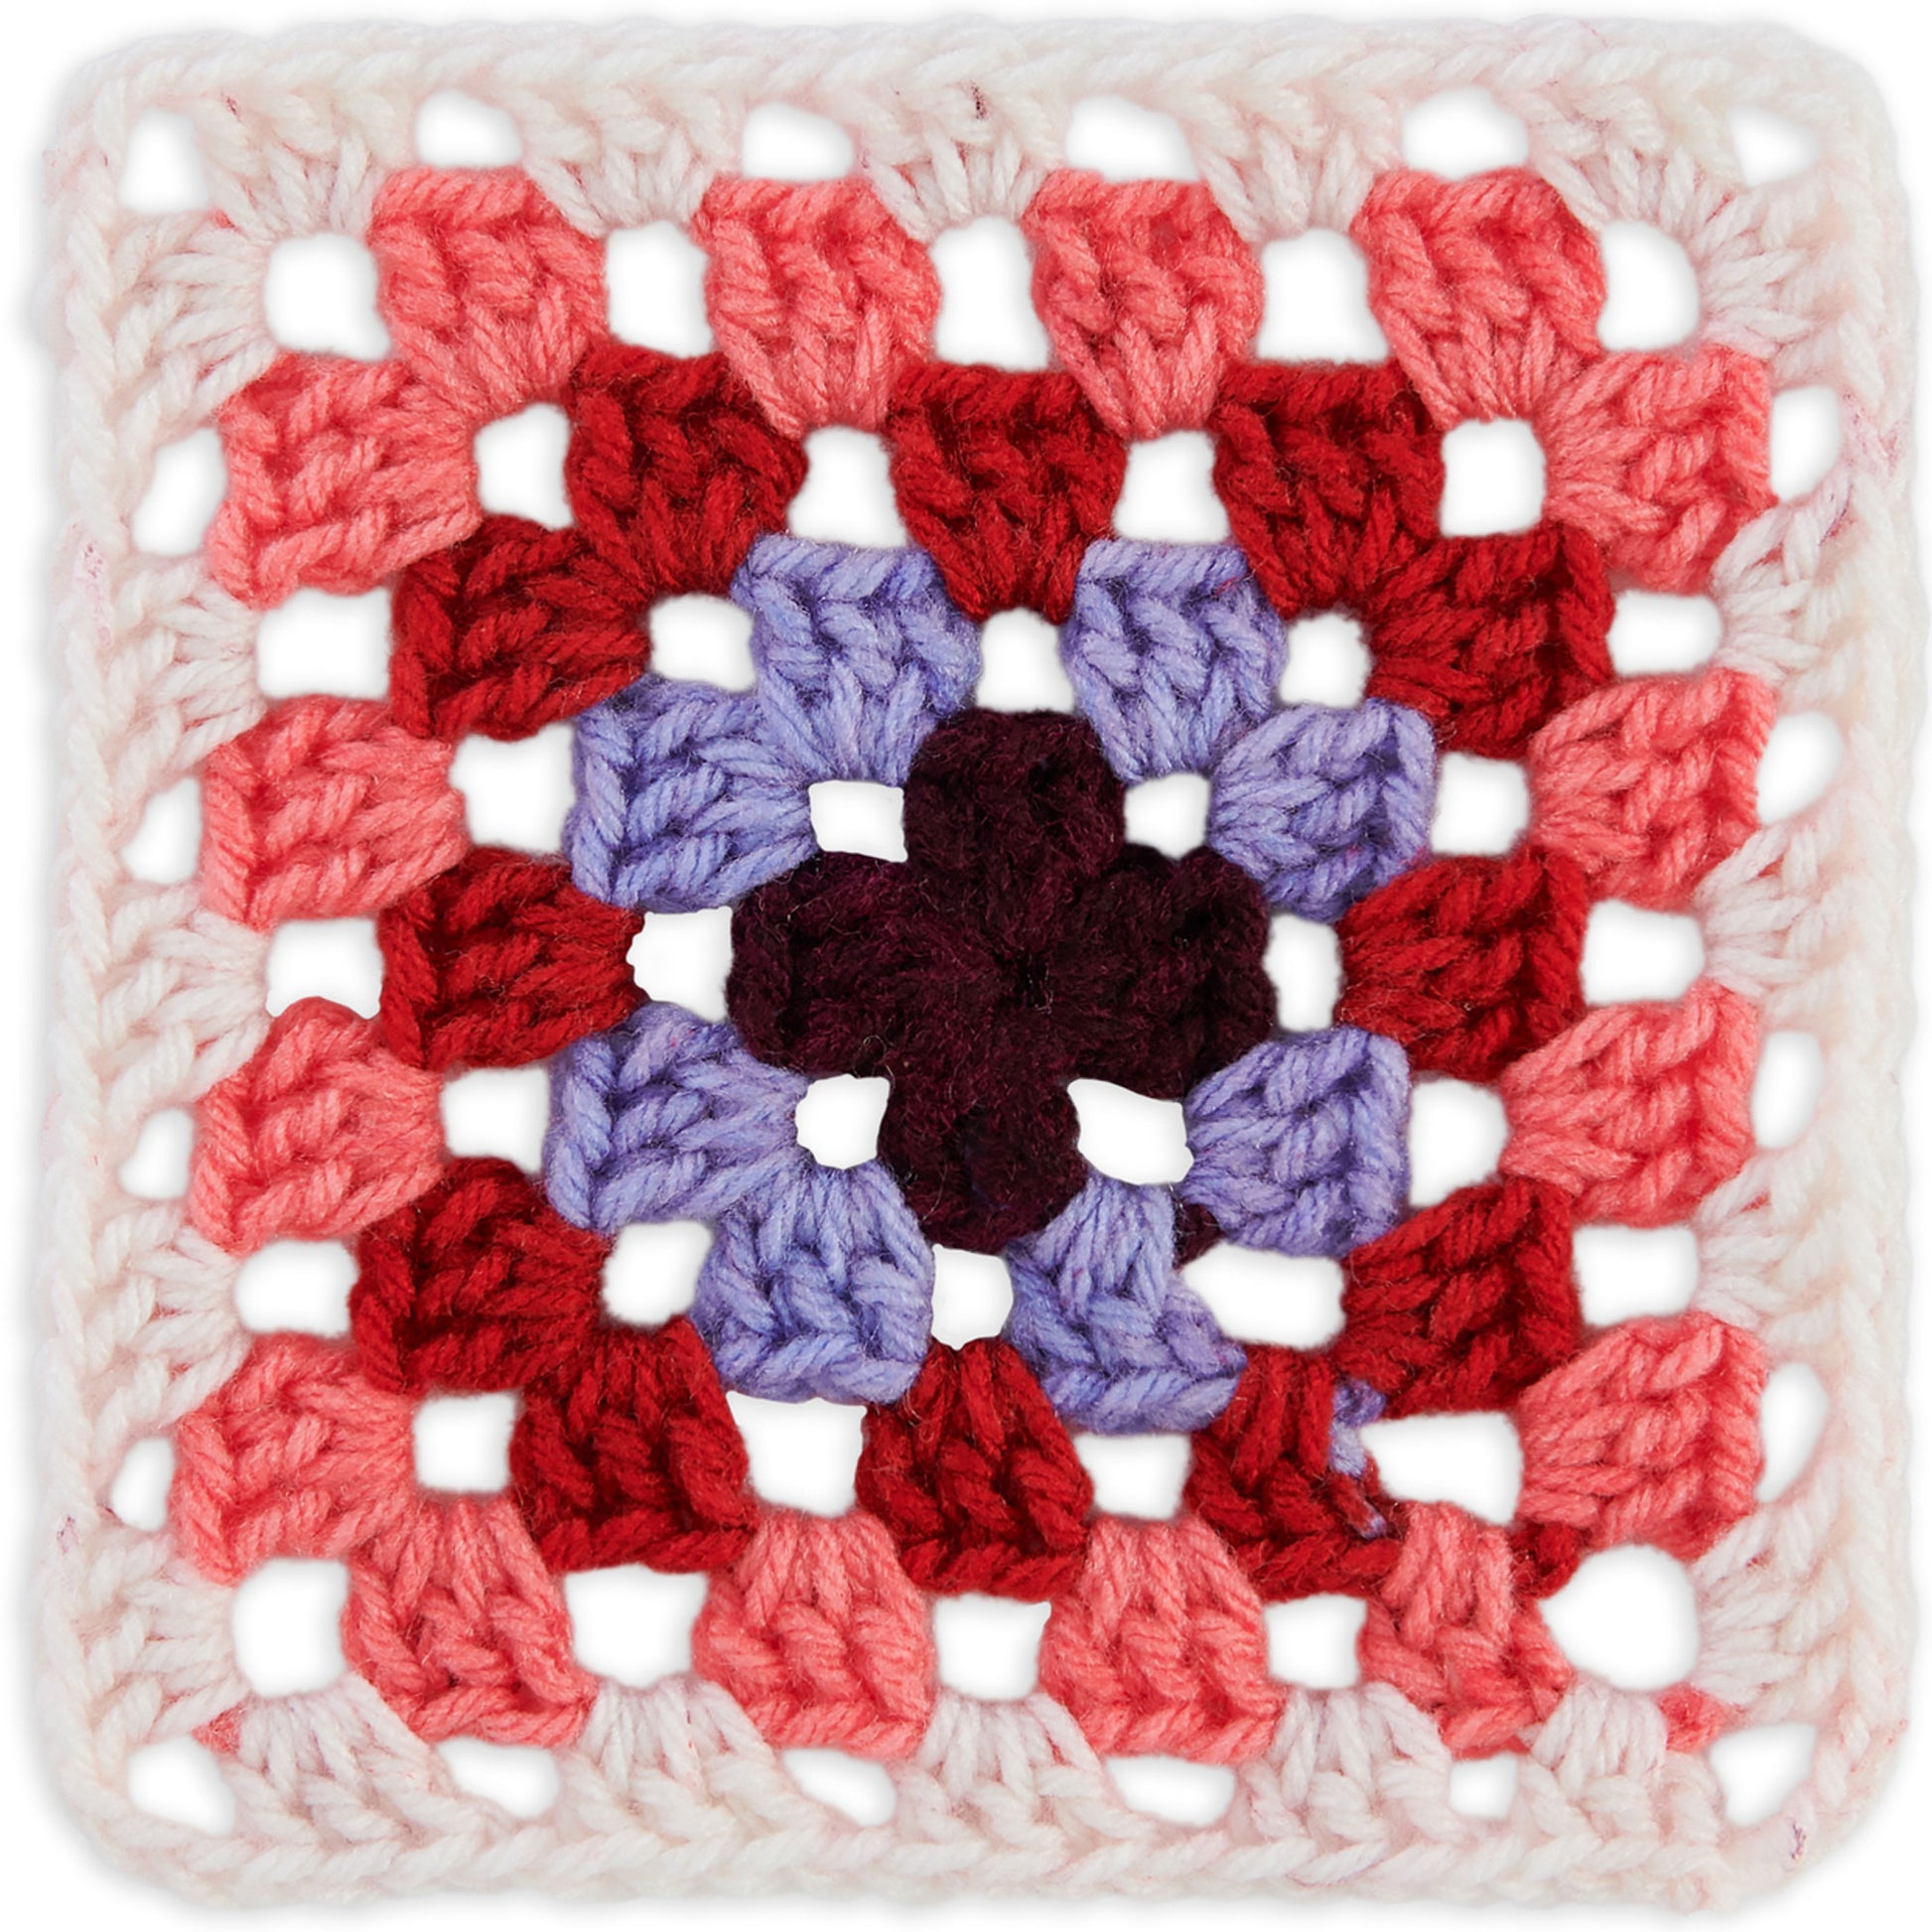 Ravelry: Red Heart All In One Granny Square